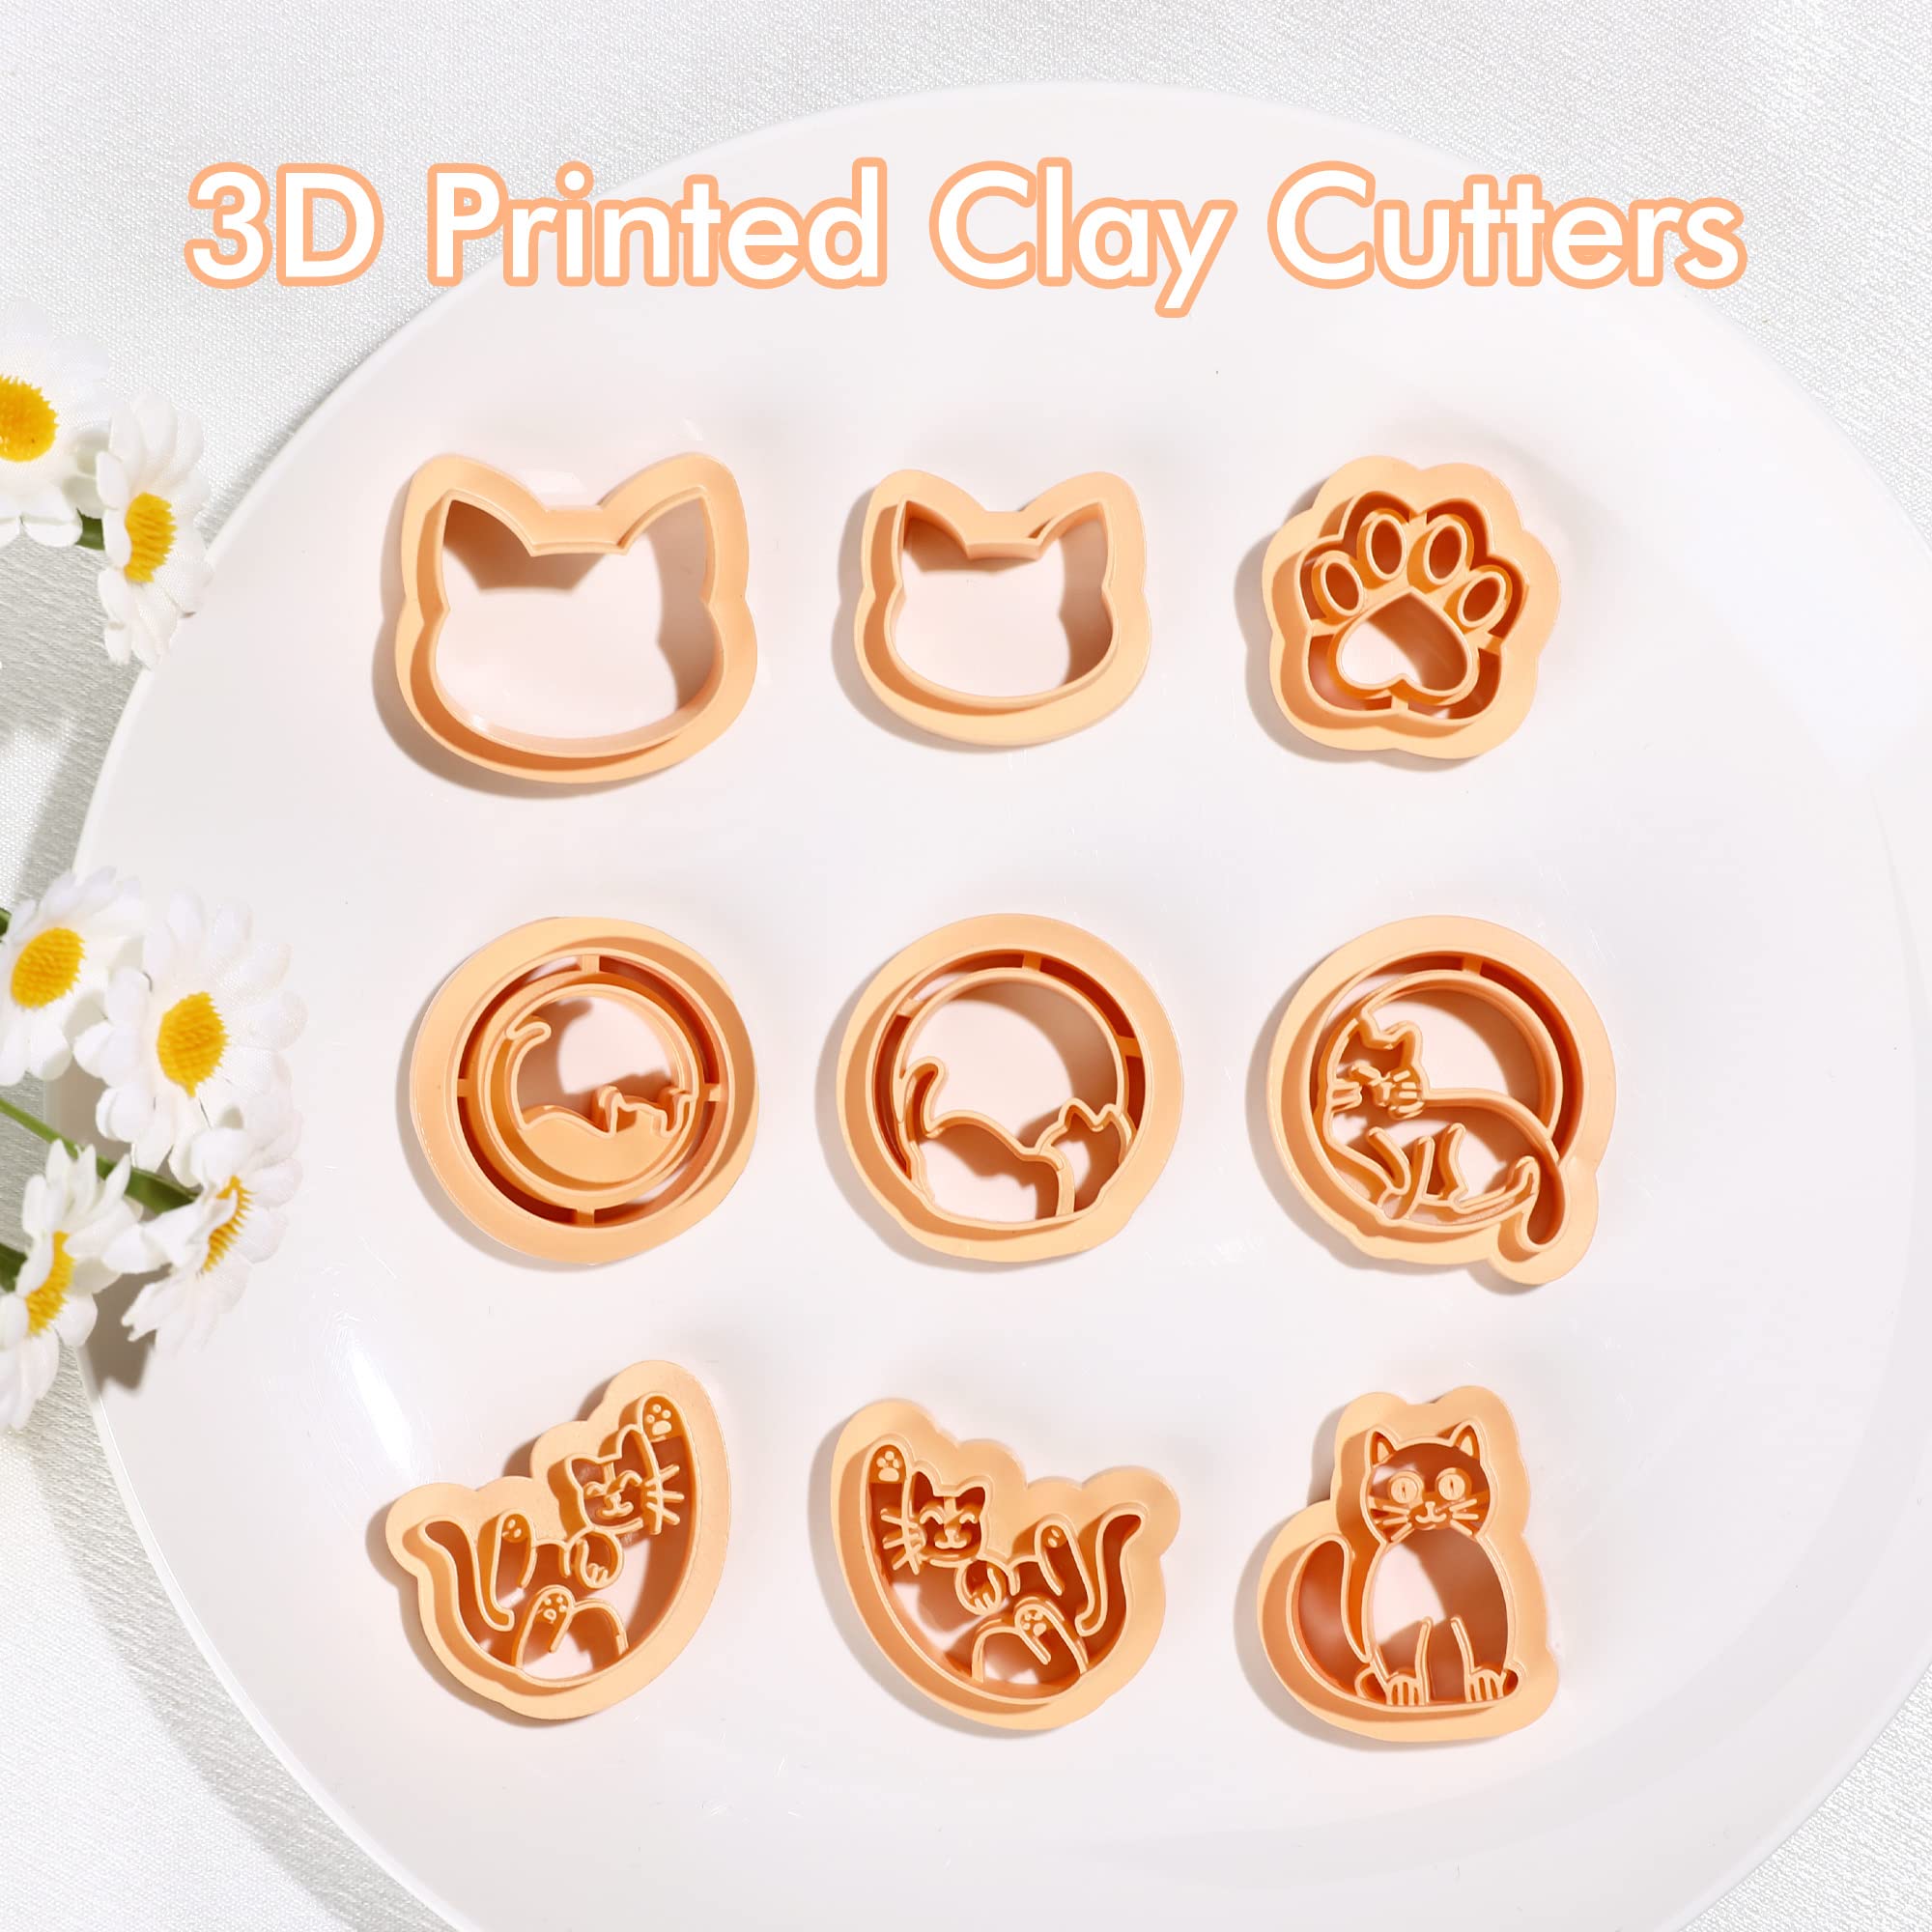  Puocaon Floral Clay Earring Cutters - 9 Shapes Clay Cutters for  Polymer Clay Jewelry Making, Bouquet Polymer Clay Cutters for Earrings,  Clay Stamps Arch Clay Cutters Earrings Making Set